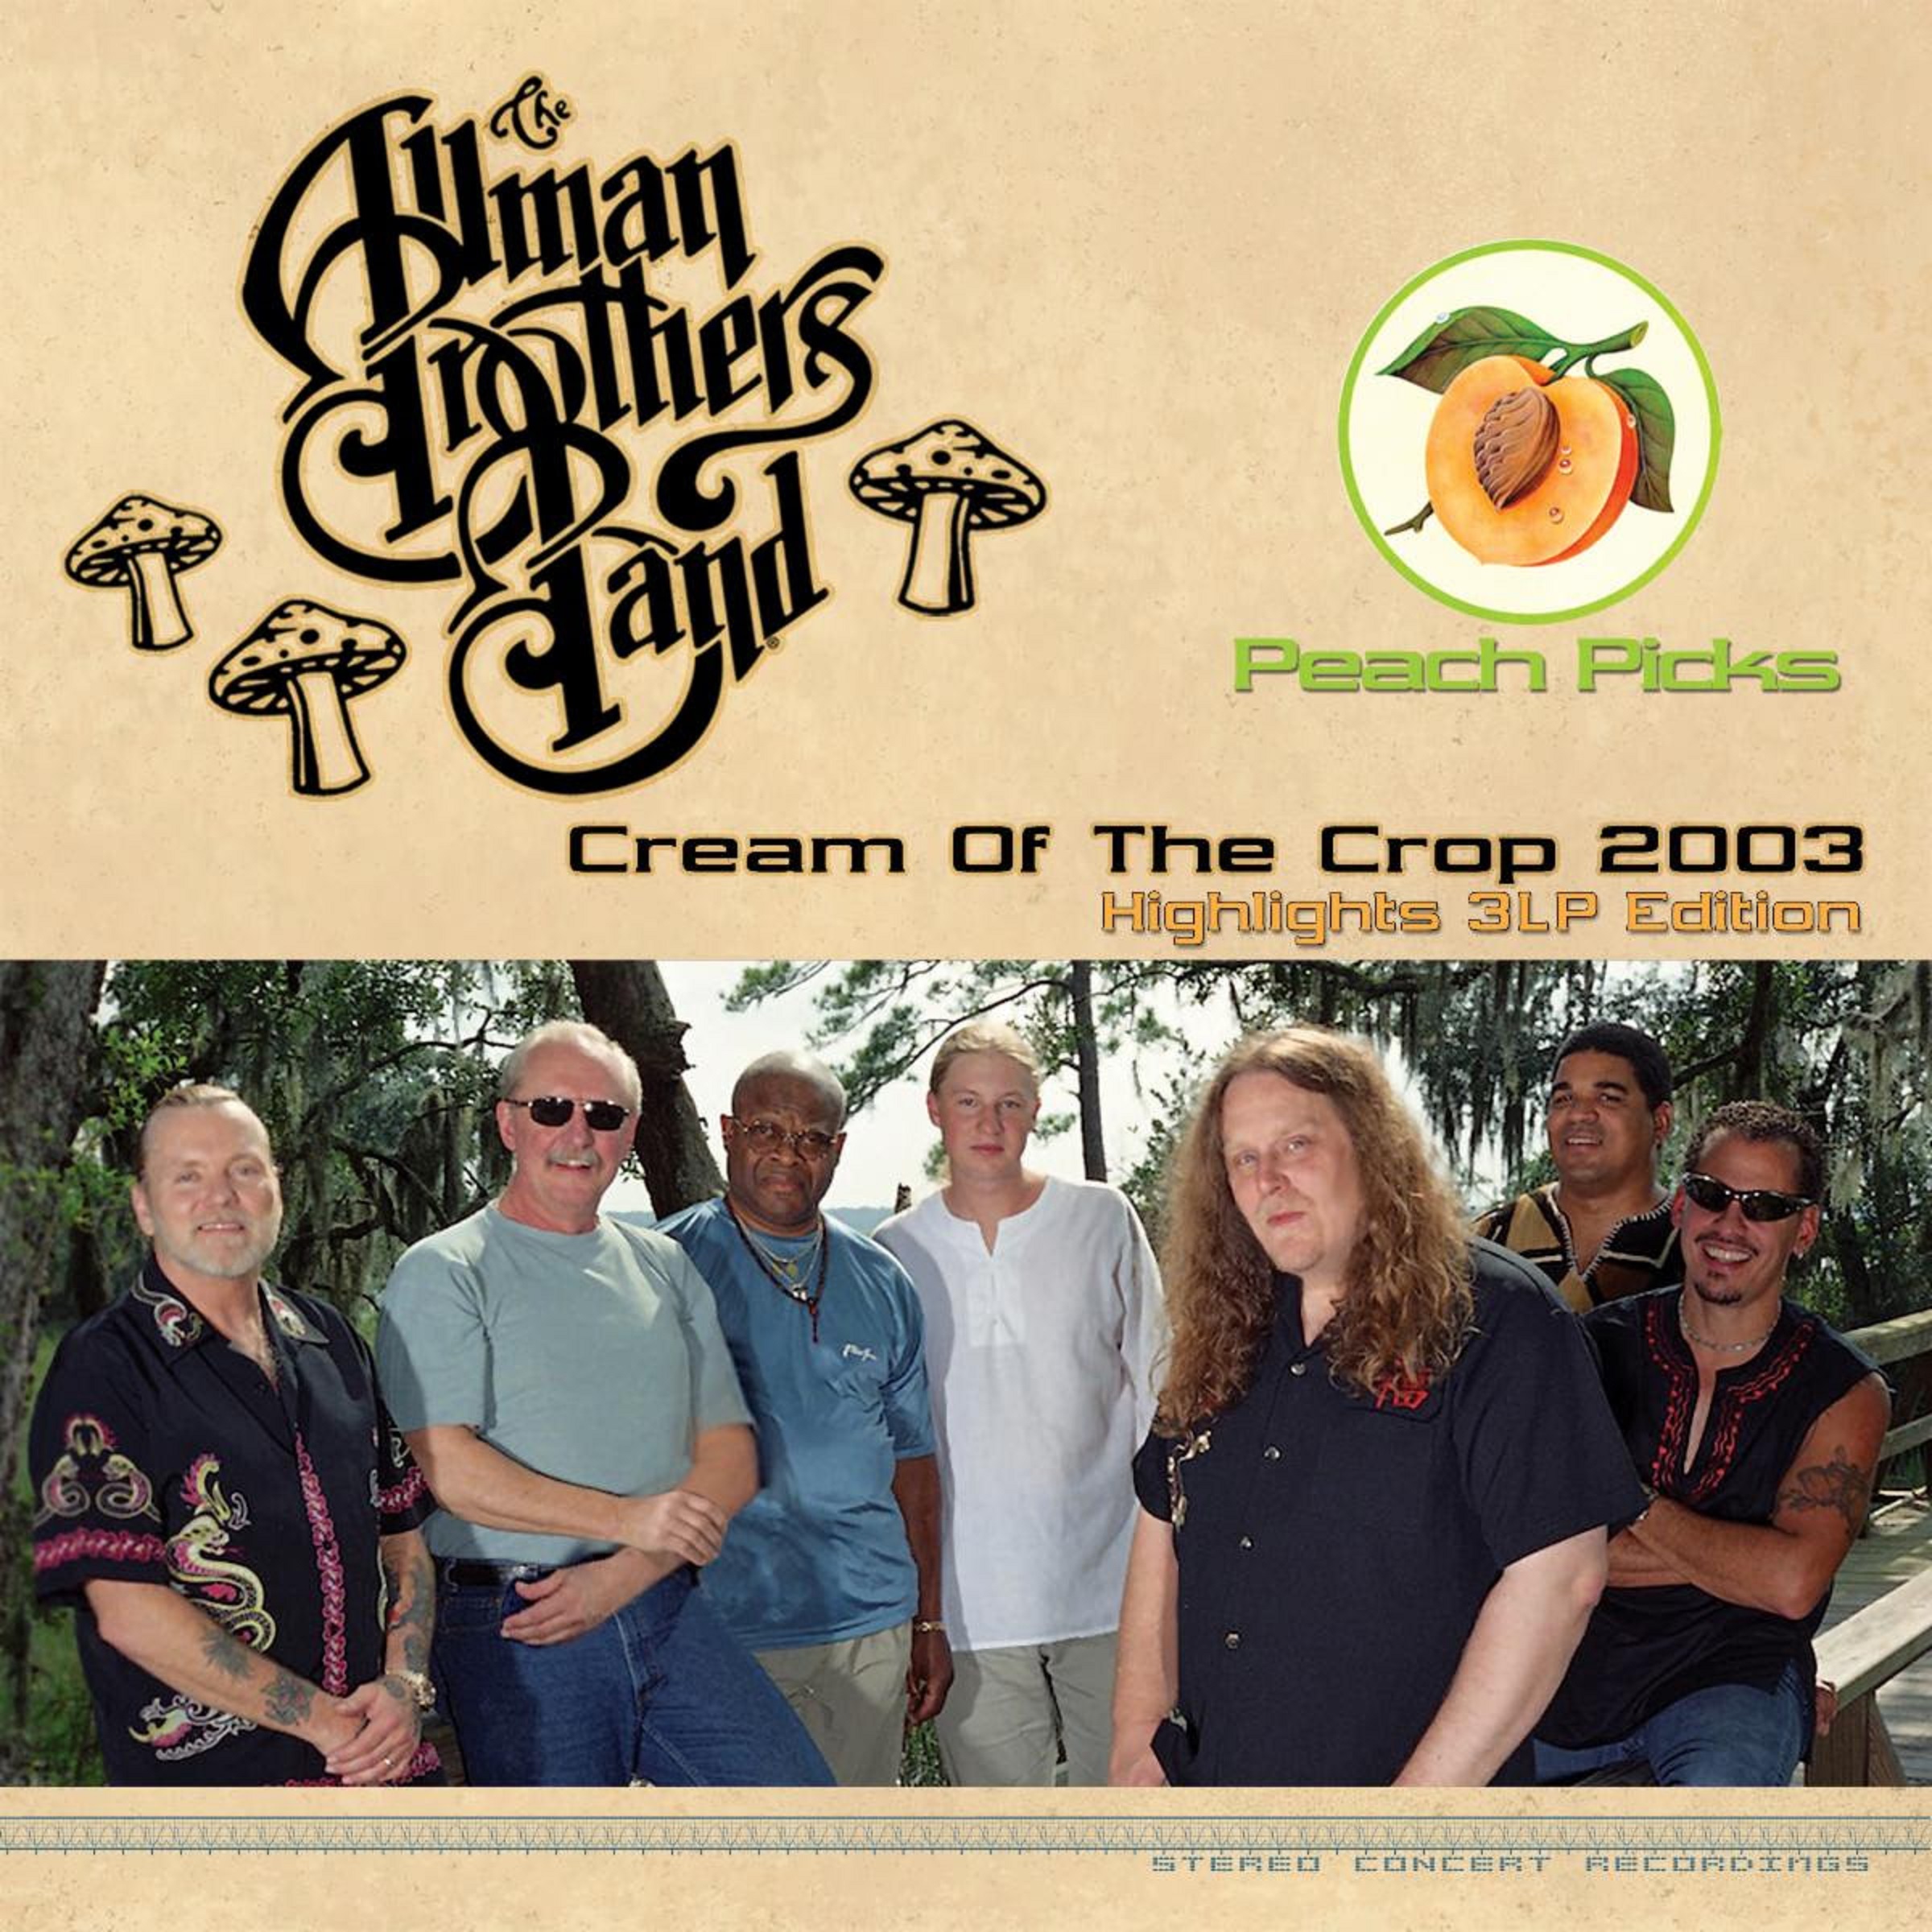 Allman Brothers Band To Release Special Edition Of “Cream Of The Crop” On 3-Color Disc-Vinyl Set For Record Store Day